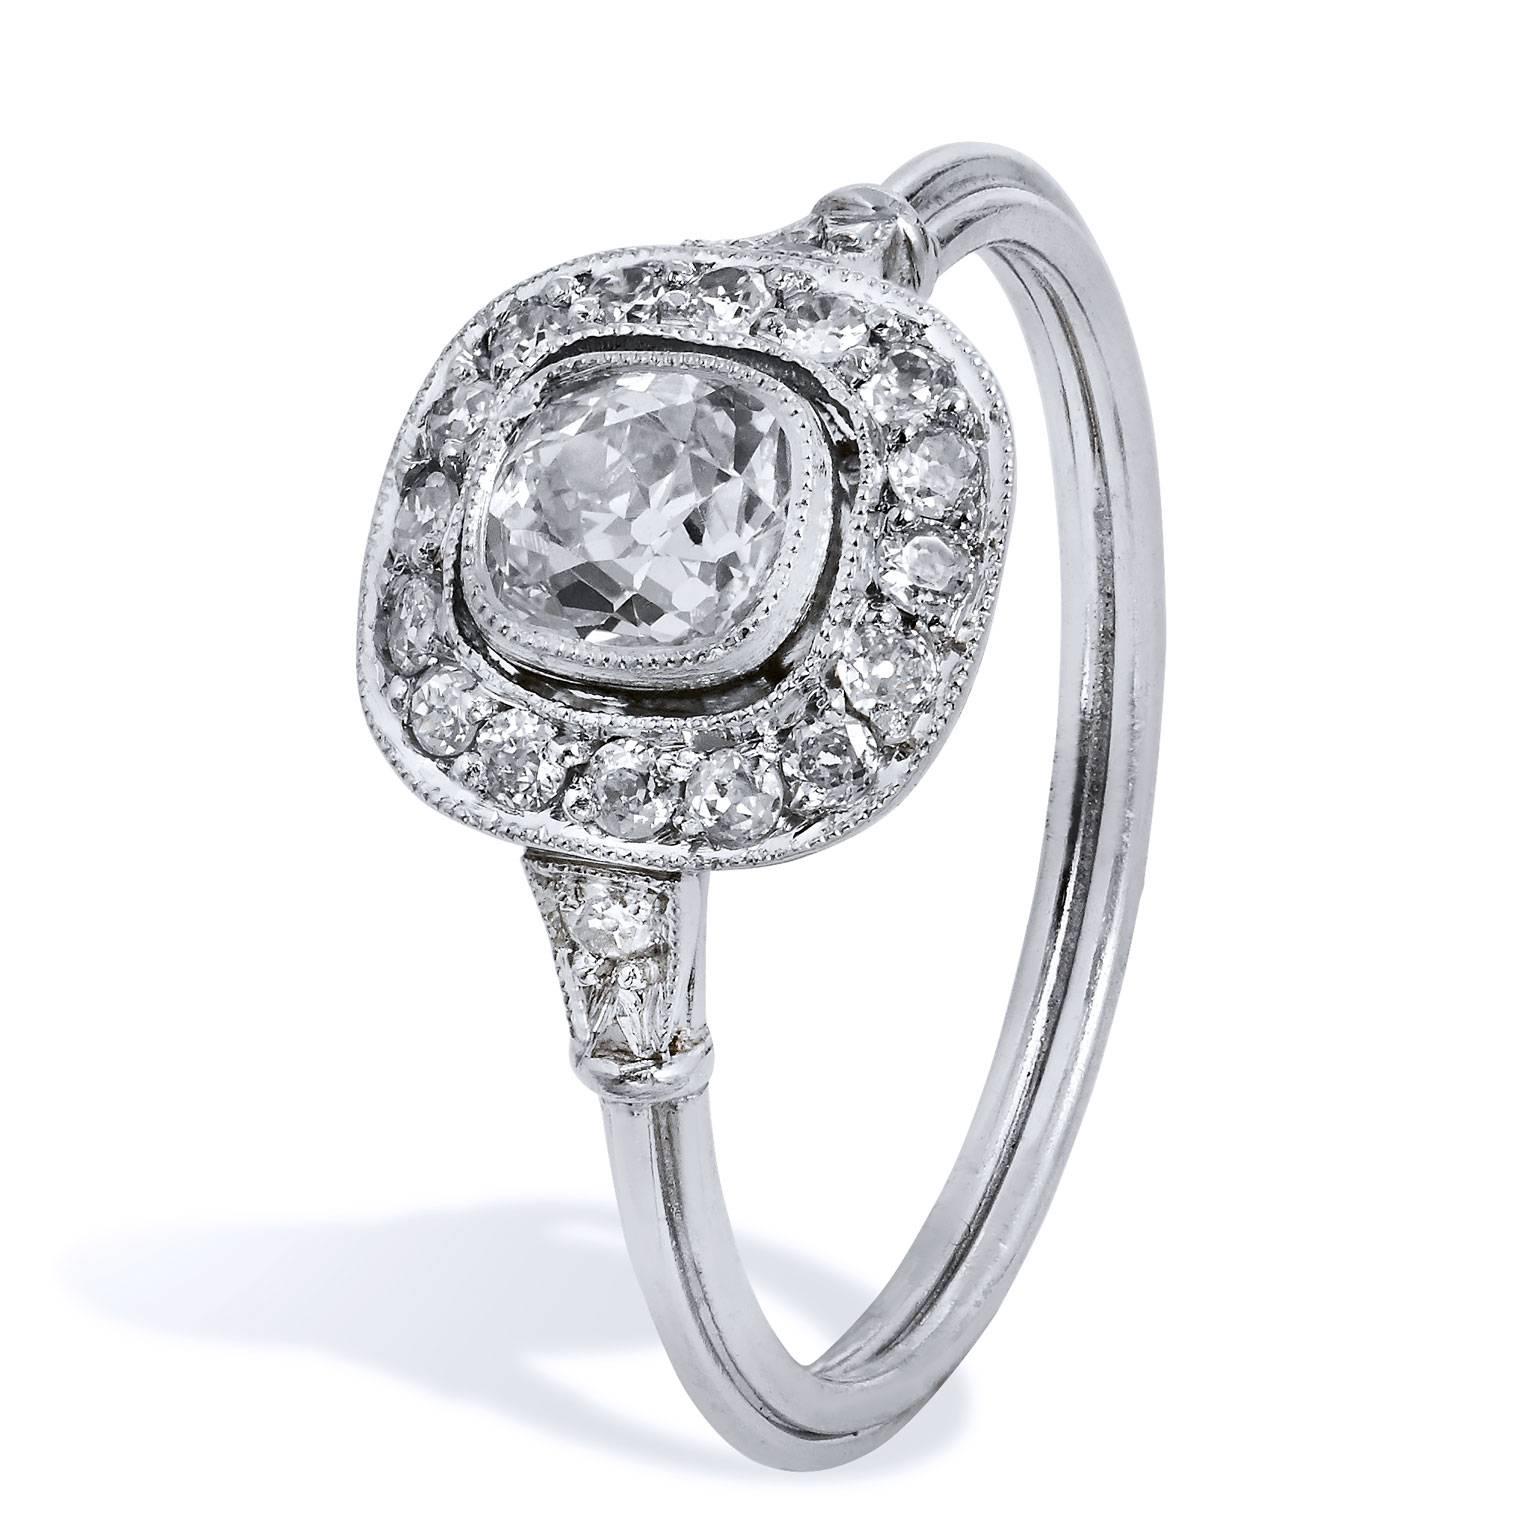 This handmade platinum engagement ring features a 0.44 carat old mine cushion cut diamond at center (J/VS2), with eighteen pieces of old European diamonds pave set (J/VS2; total weight: 0.23 carats) with milgrain work accentuation at both the center